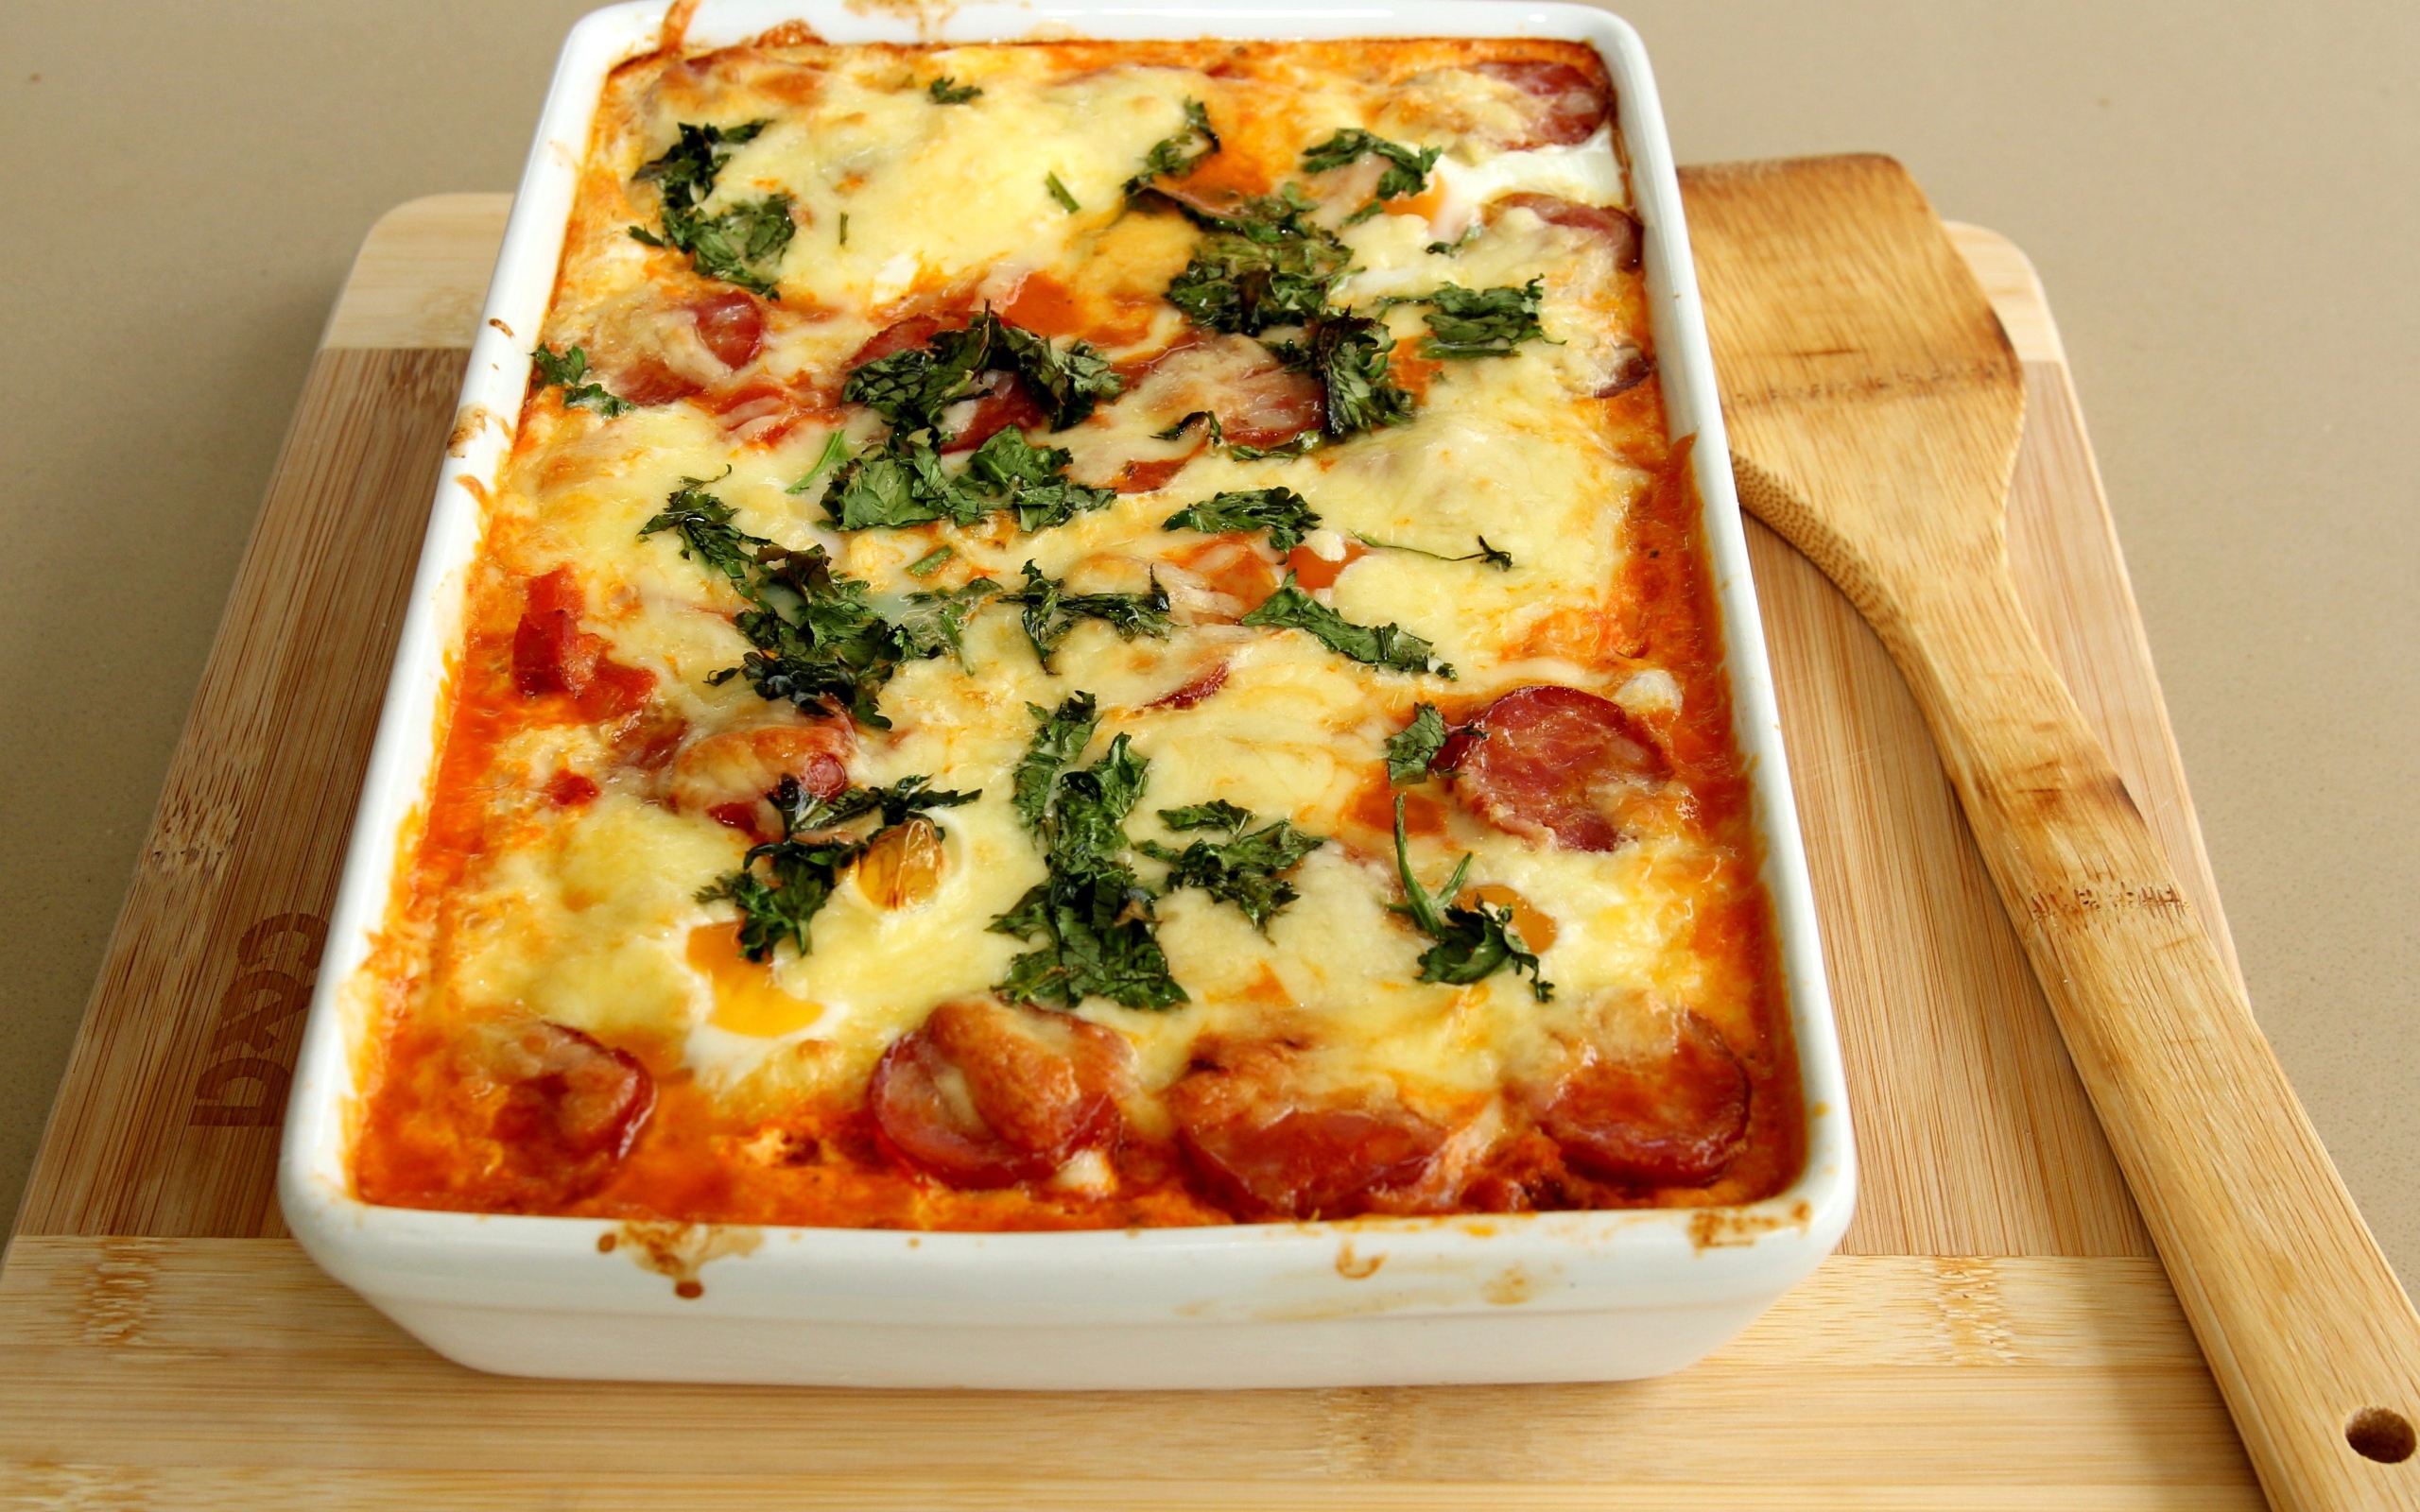 Casserole with sausage and cheese on the table